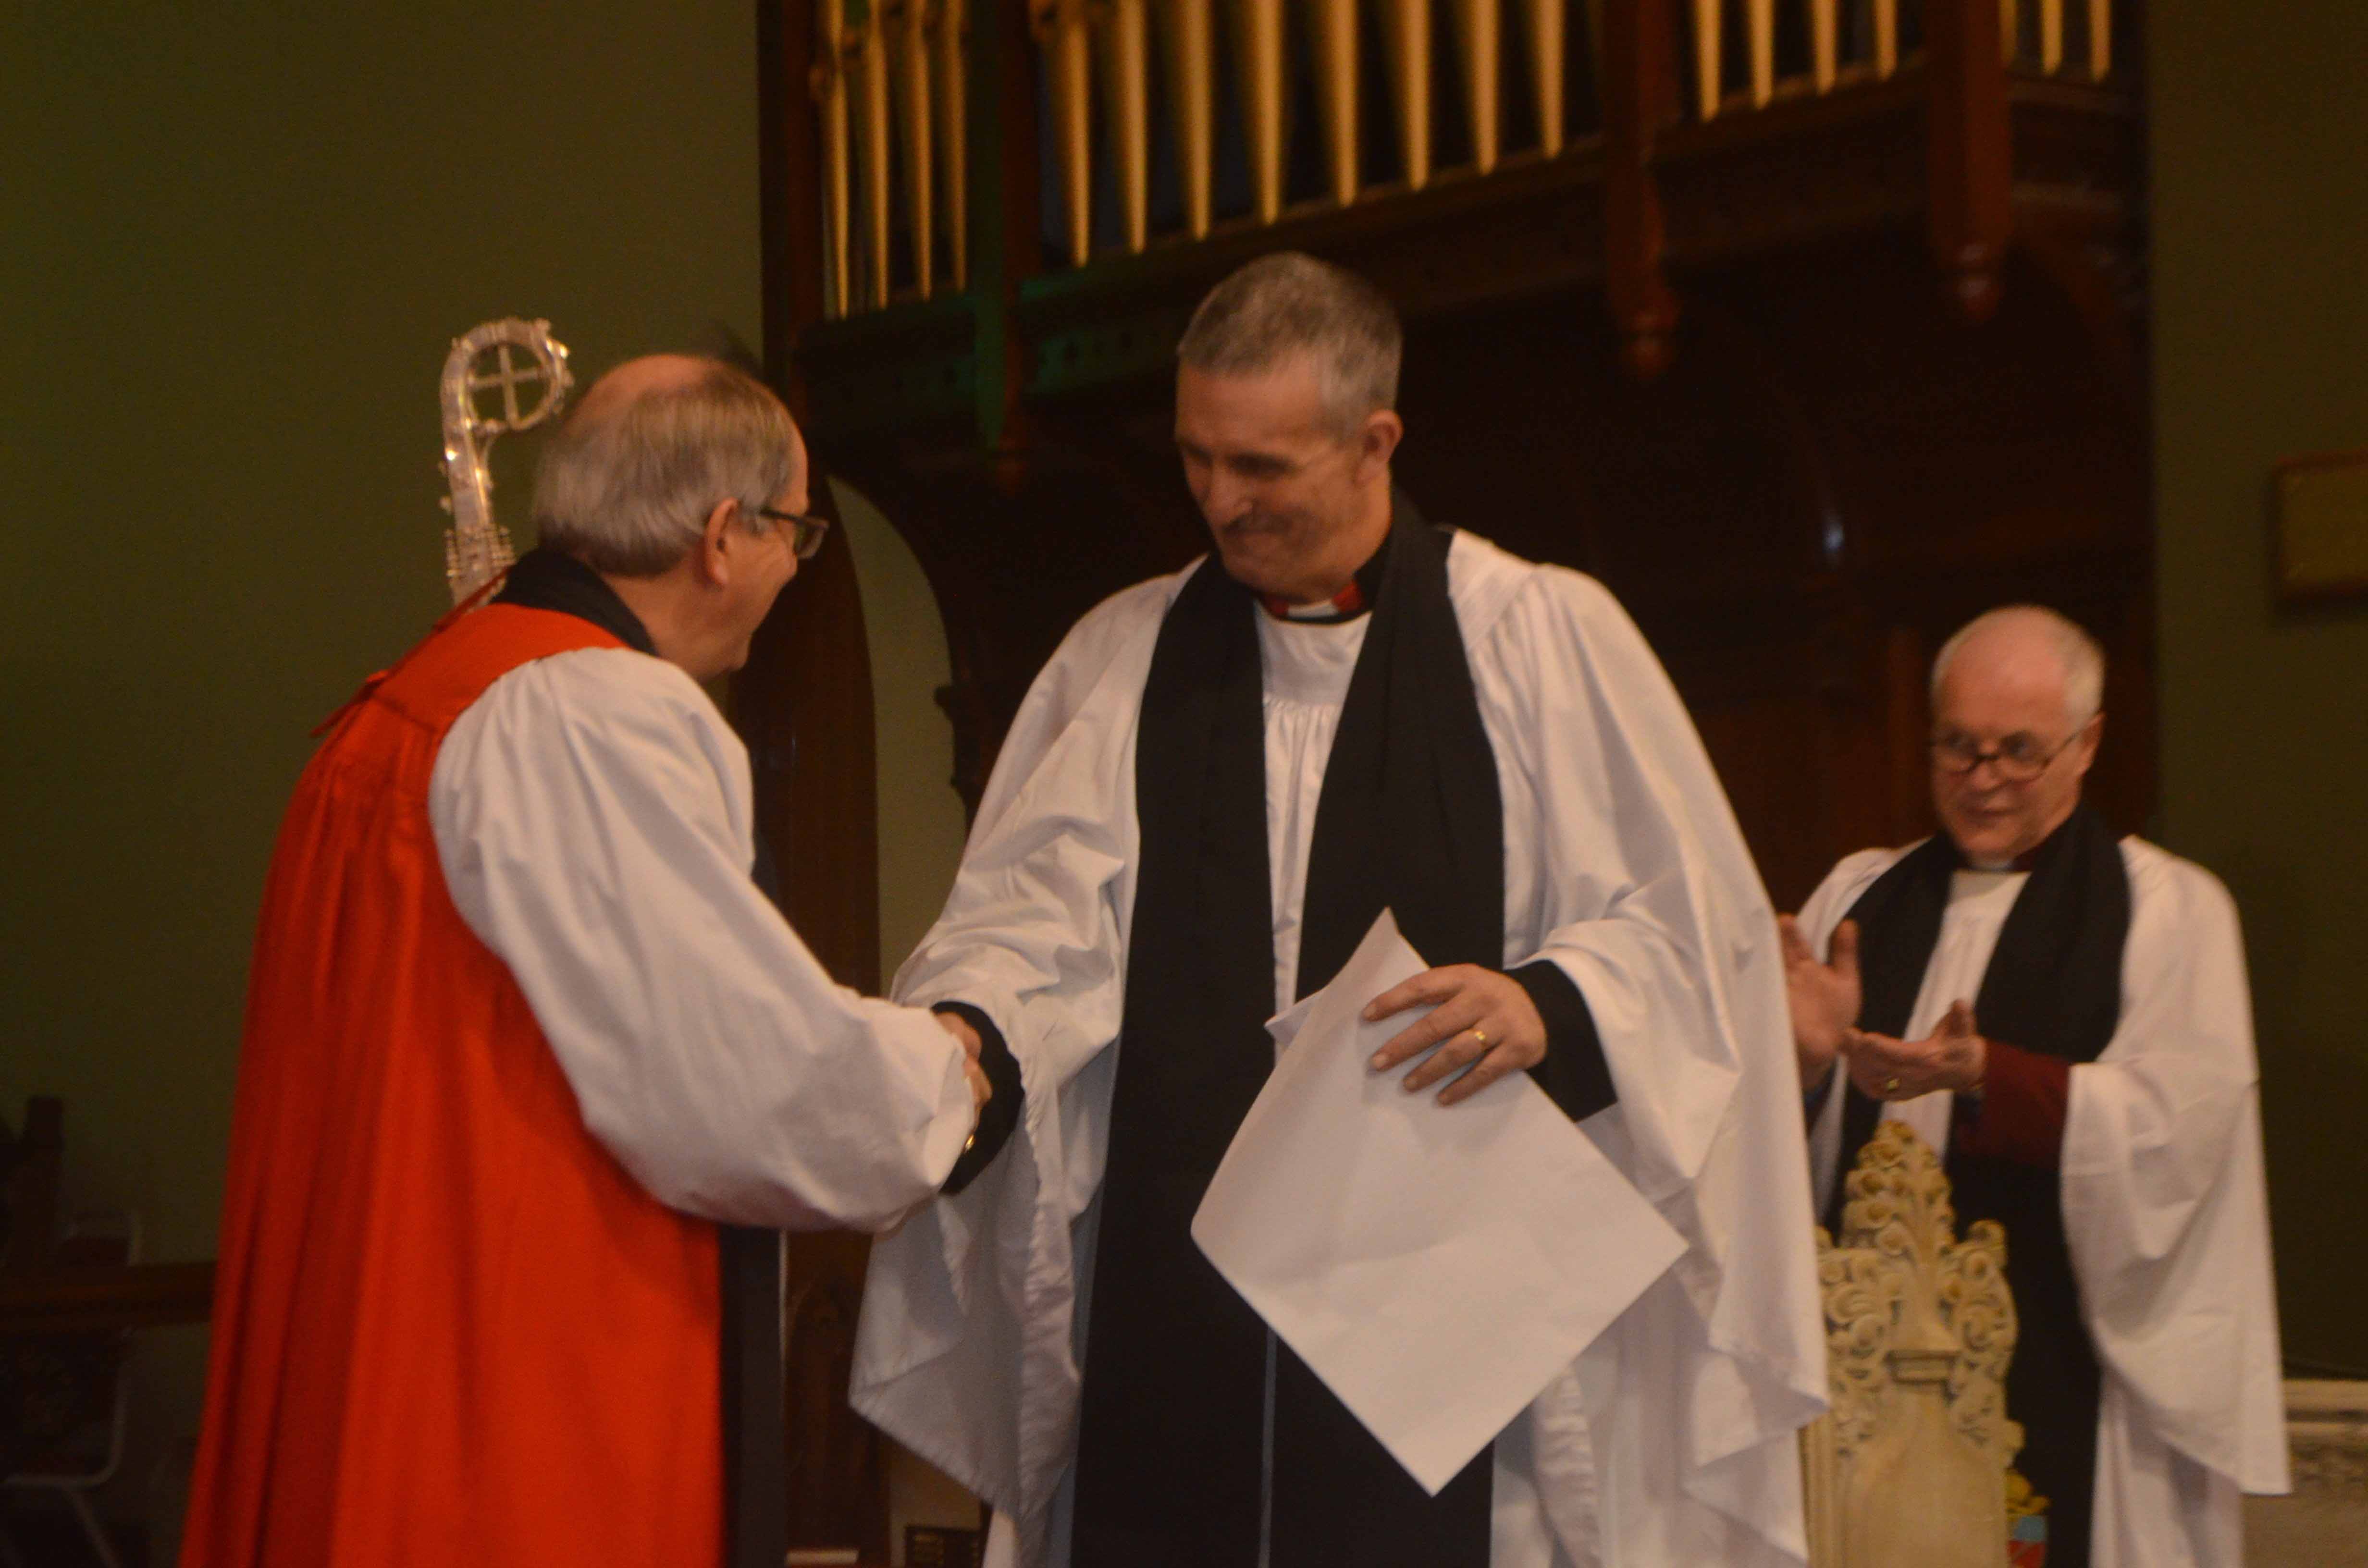 The Bishop of Derry and Raphoe, the Rt Rev Ken Good, congratulates the new rector of the parish of Camus-Juxta-Mourne, the Rev John White, watched by the Rural Dean for Omagh, the Rev Canon Robert Clarke.